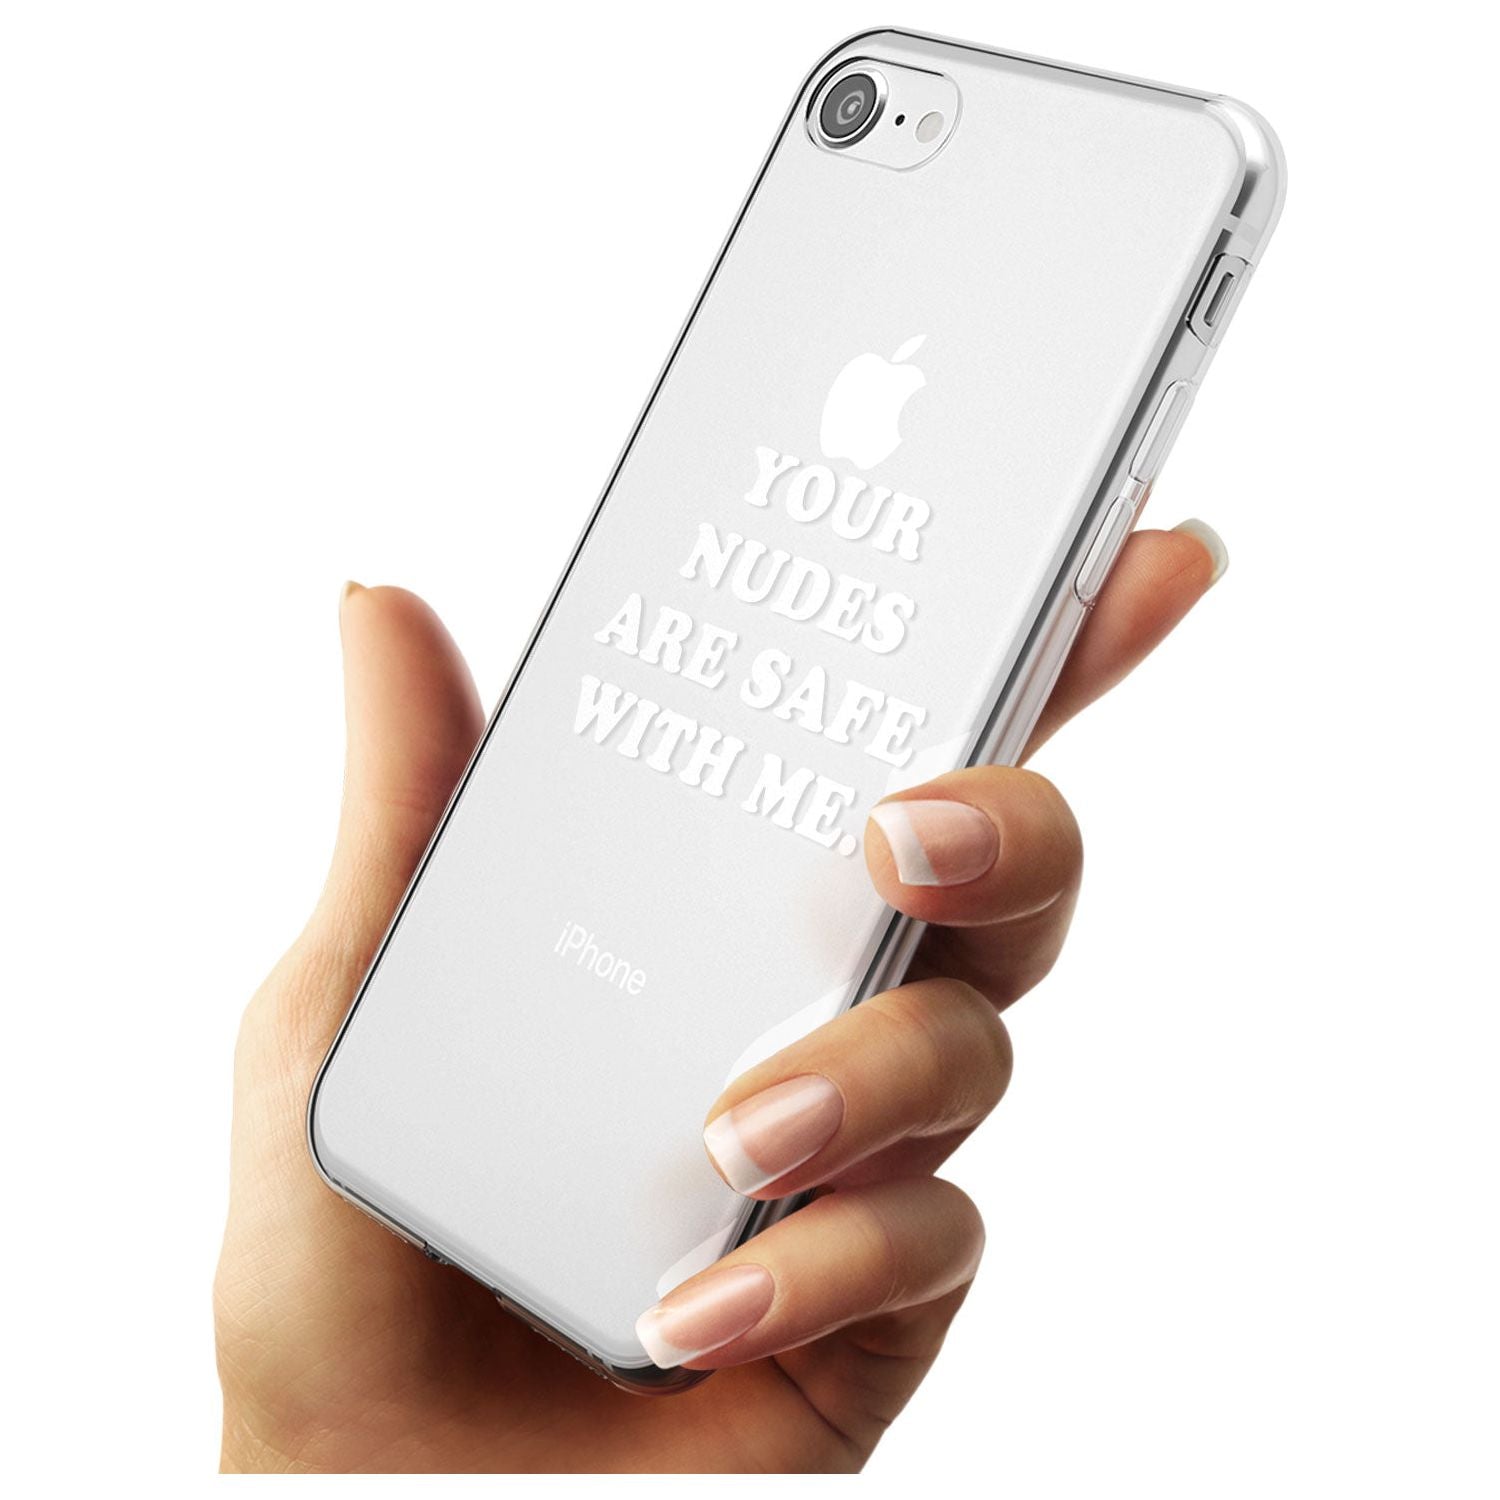 Your nudes are safe with me... WHITE Slim TPU Phone Case for iPhone SE 8 7 Plus